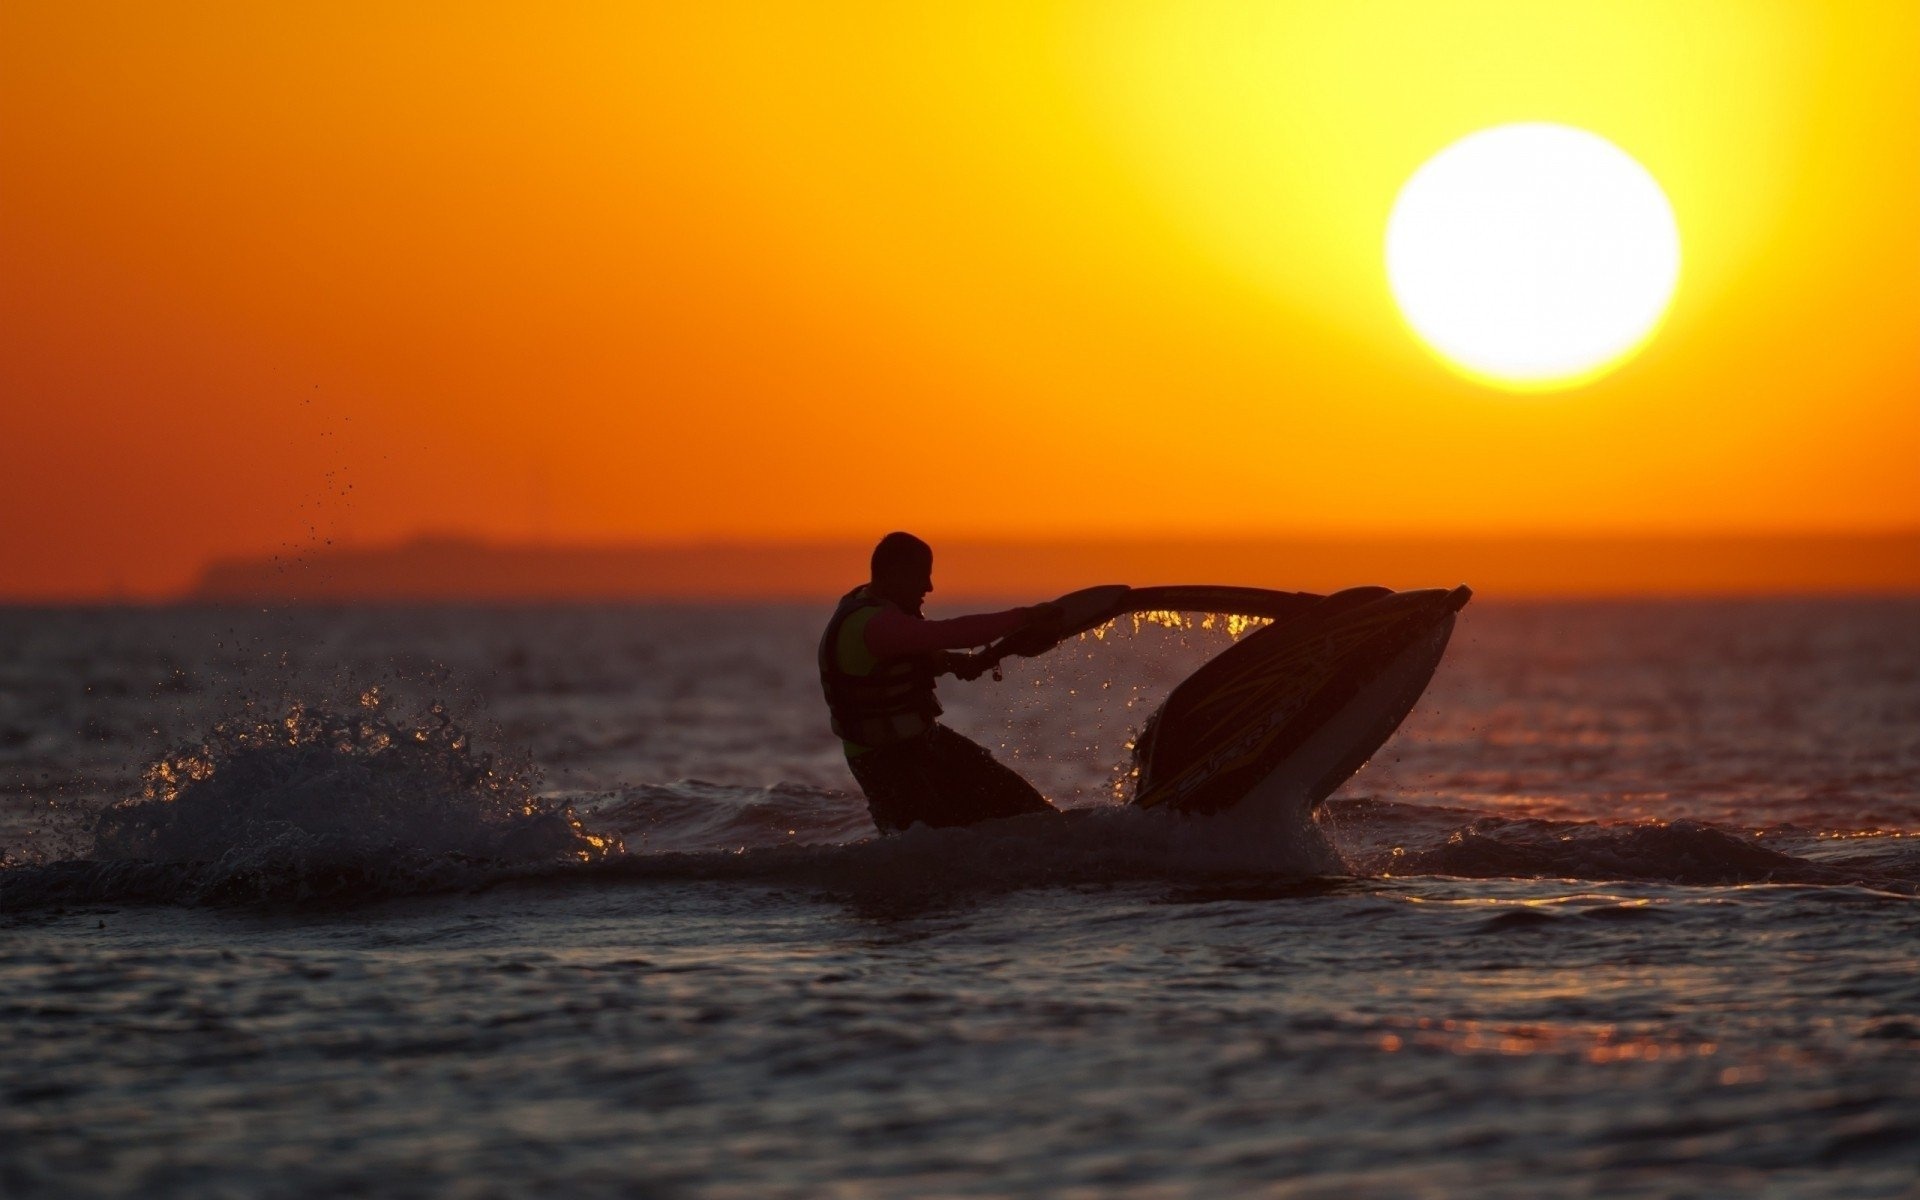 Jet Ski: An offshore racer, Outdoor activity at sunset. 1920x1200 HD Background.